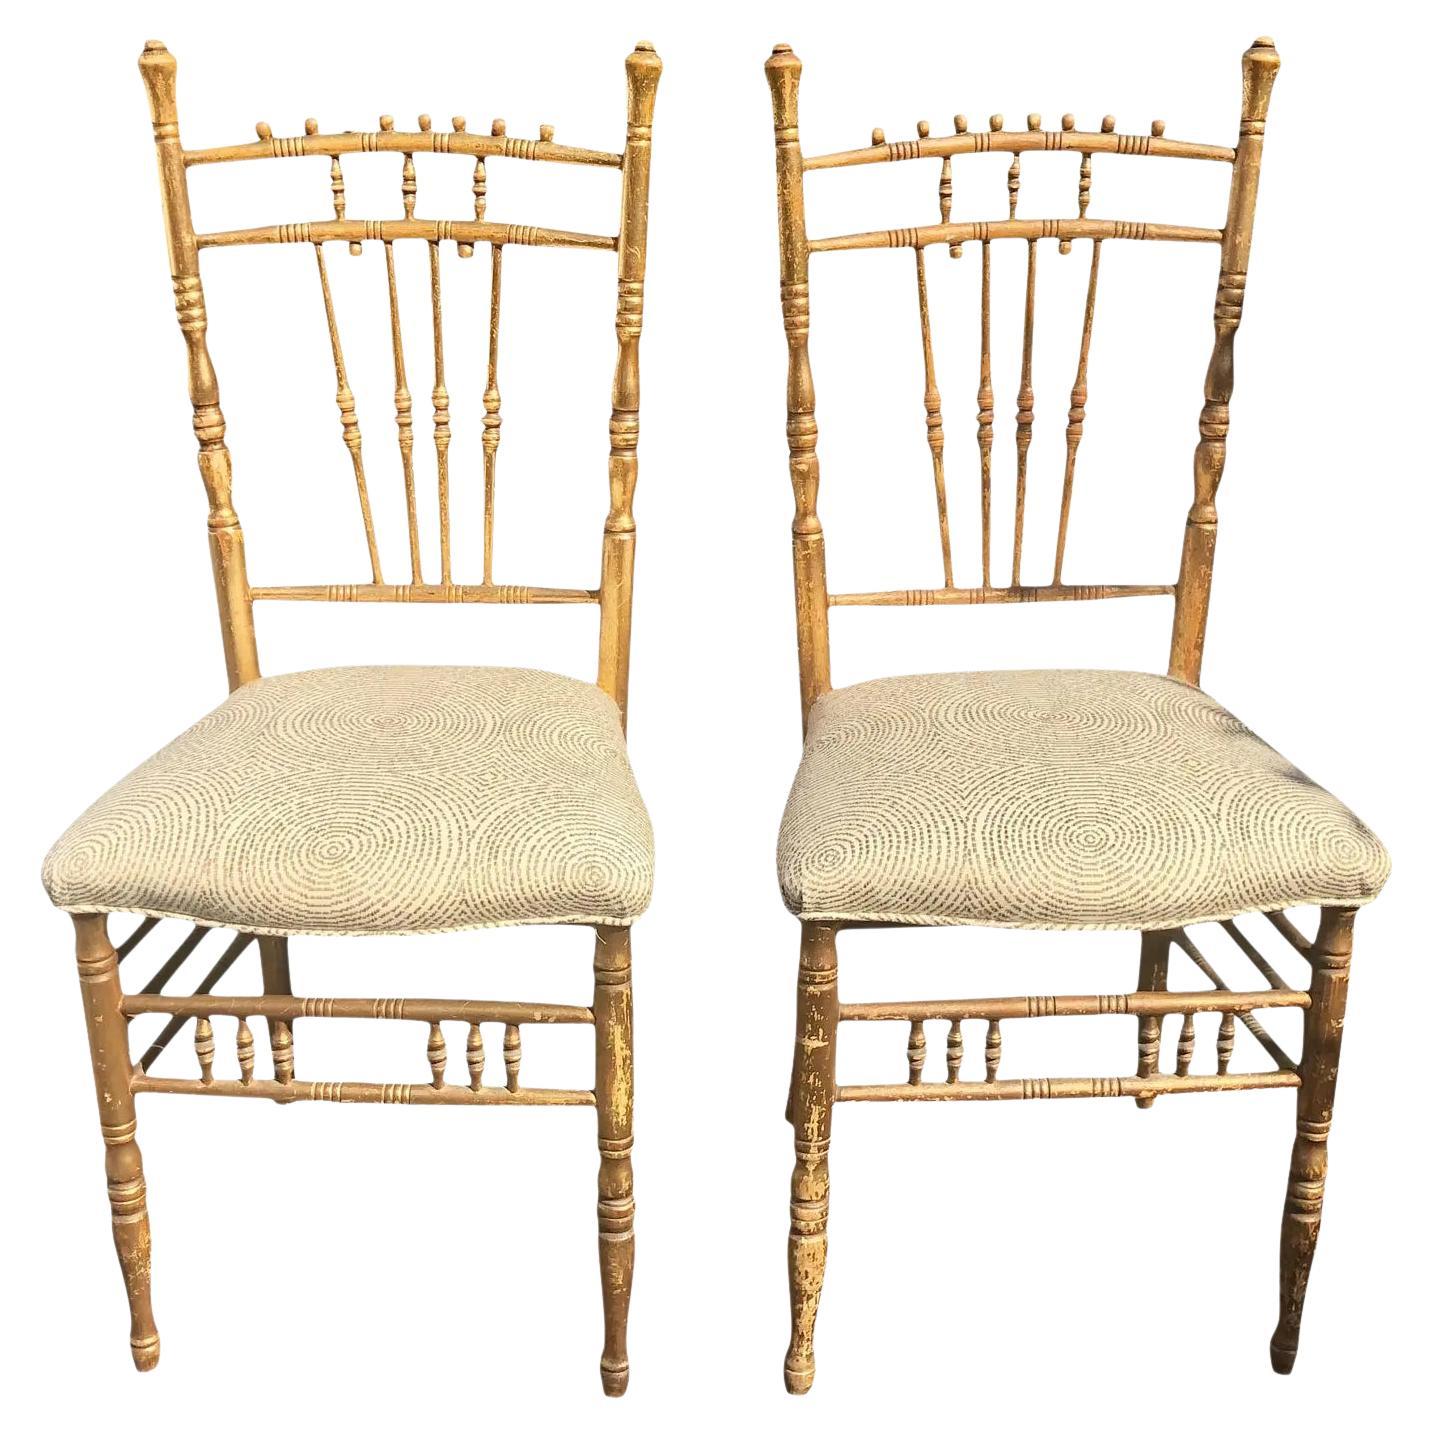 Pair of Antique Regency Style Side Chairs, Late 19th Century